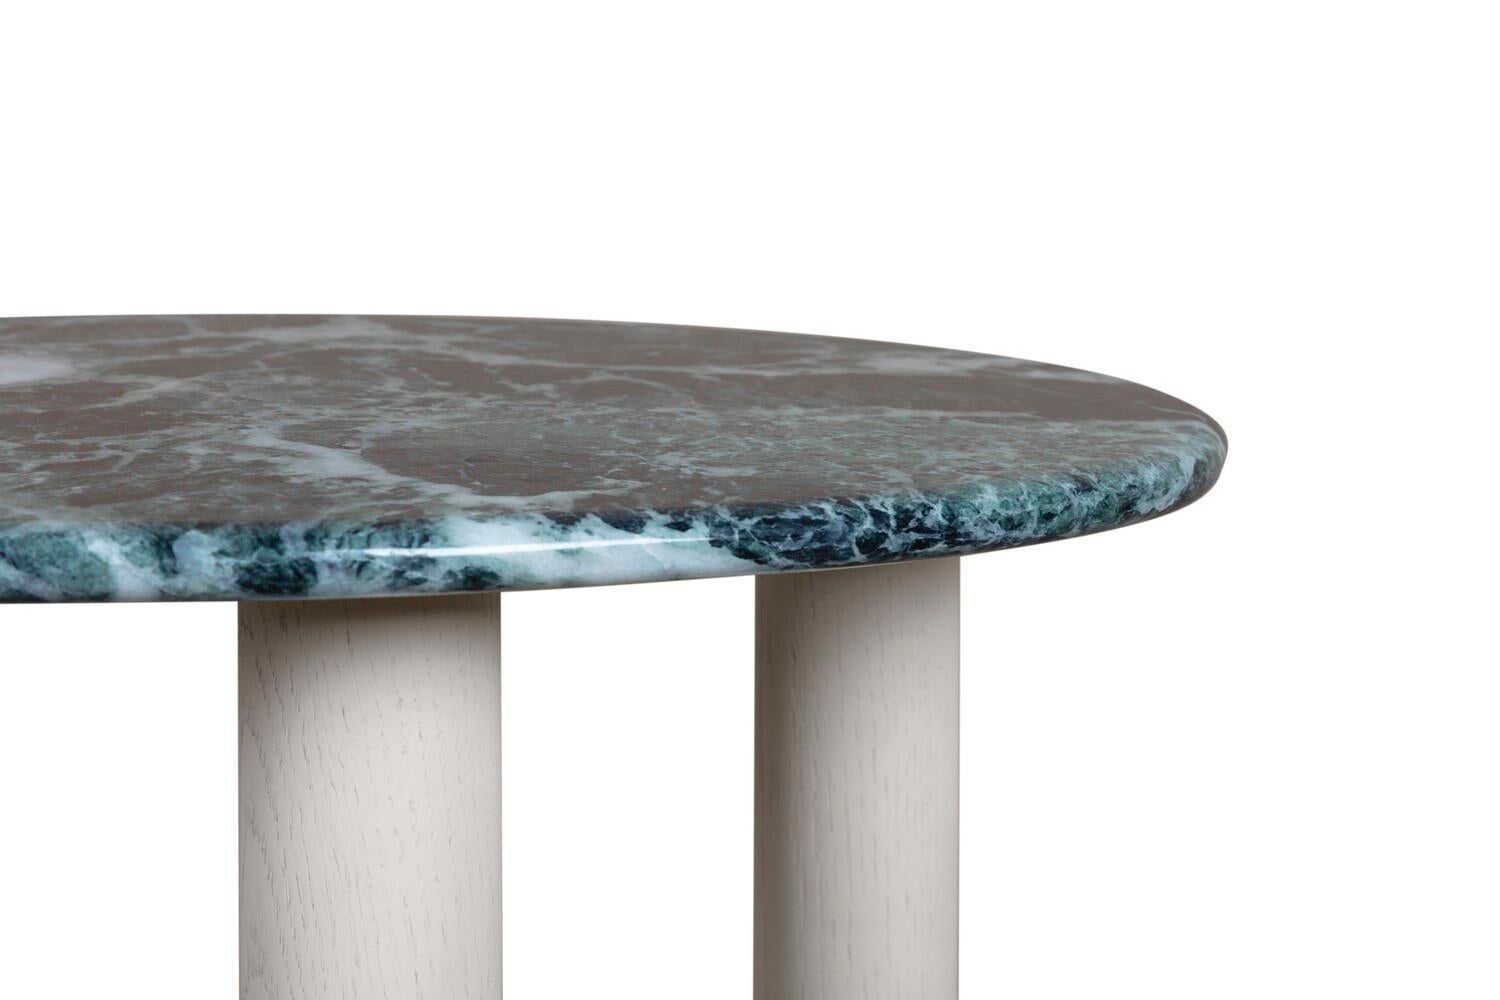 The beauty of the Bruton side table lies in the exquisite detail. The solid Verdi Alpi marble top has a wonderful irregular shape, and is finished with a bull-nose edge which echoes the organic lines of the leg. The warmth of solid oak works in